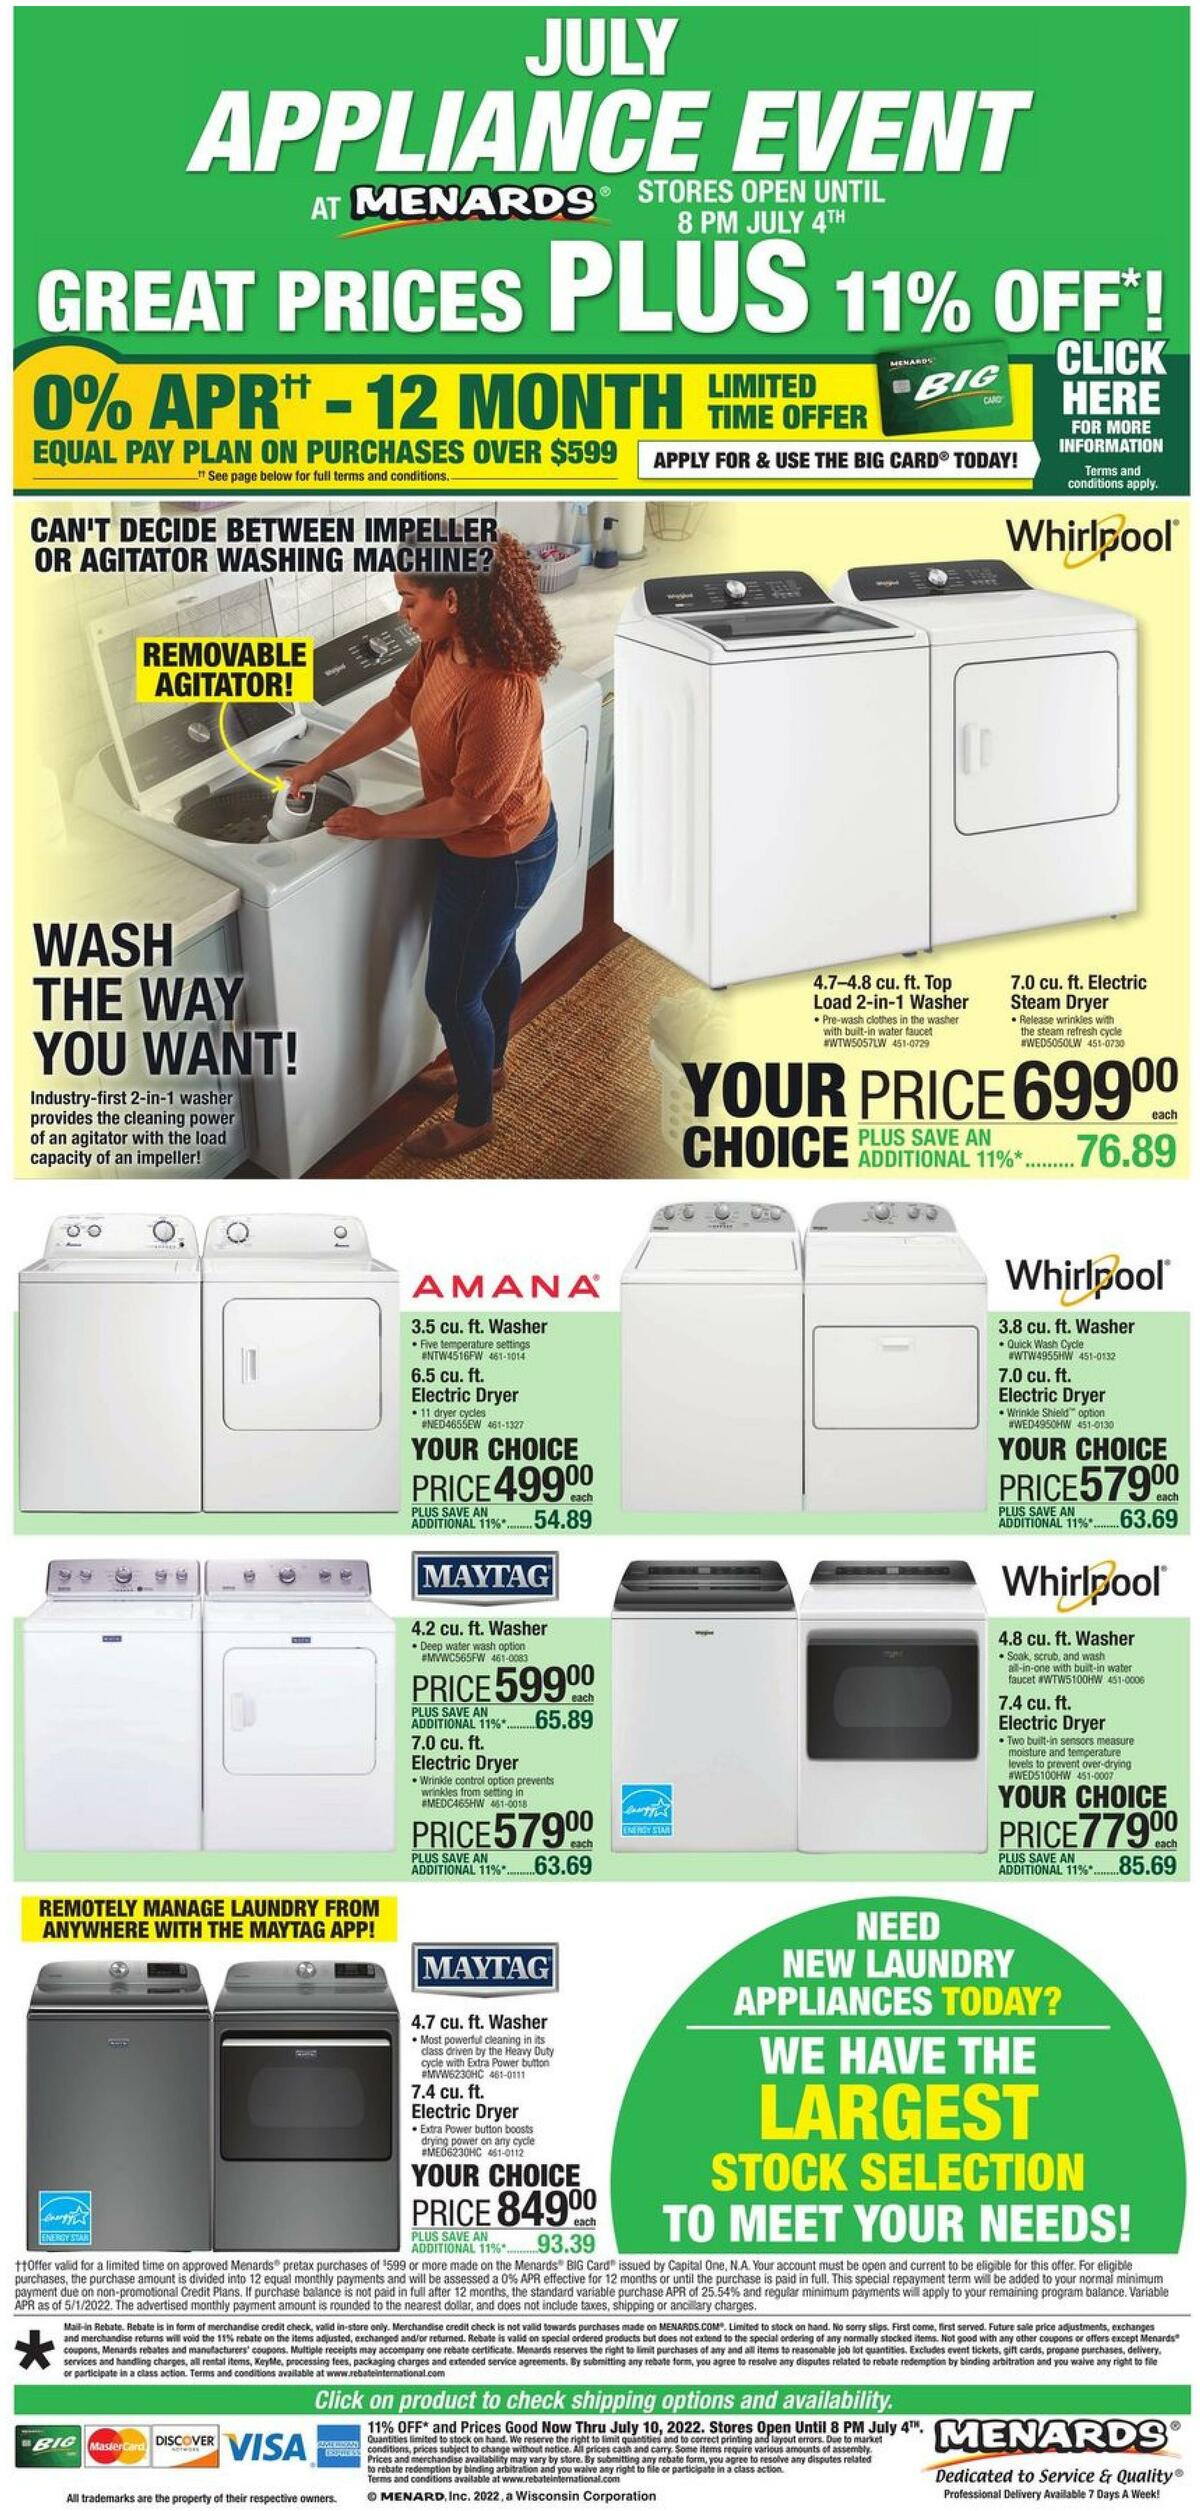 Menards July Appliance Event Weekly Ad from June 29